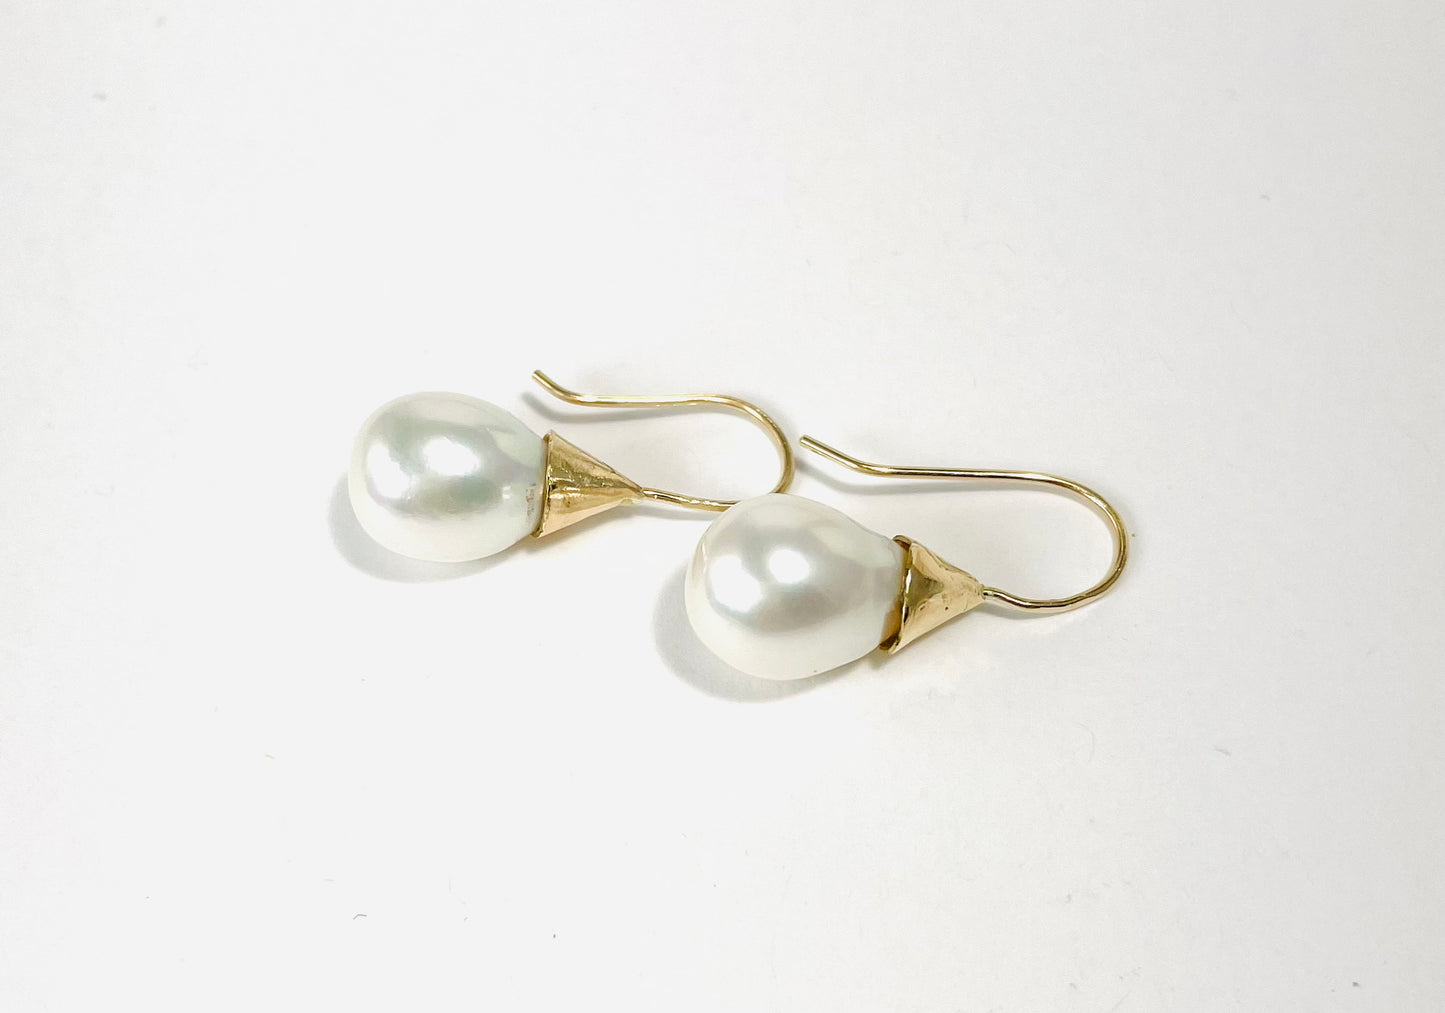 Baroque pearls set in 14K gold